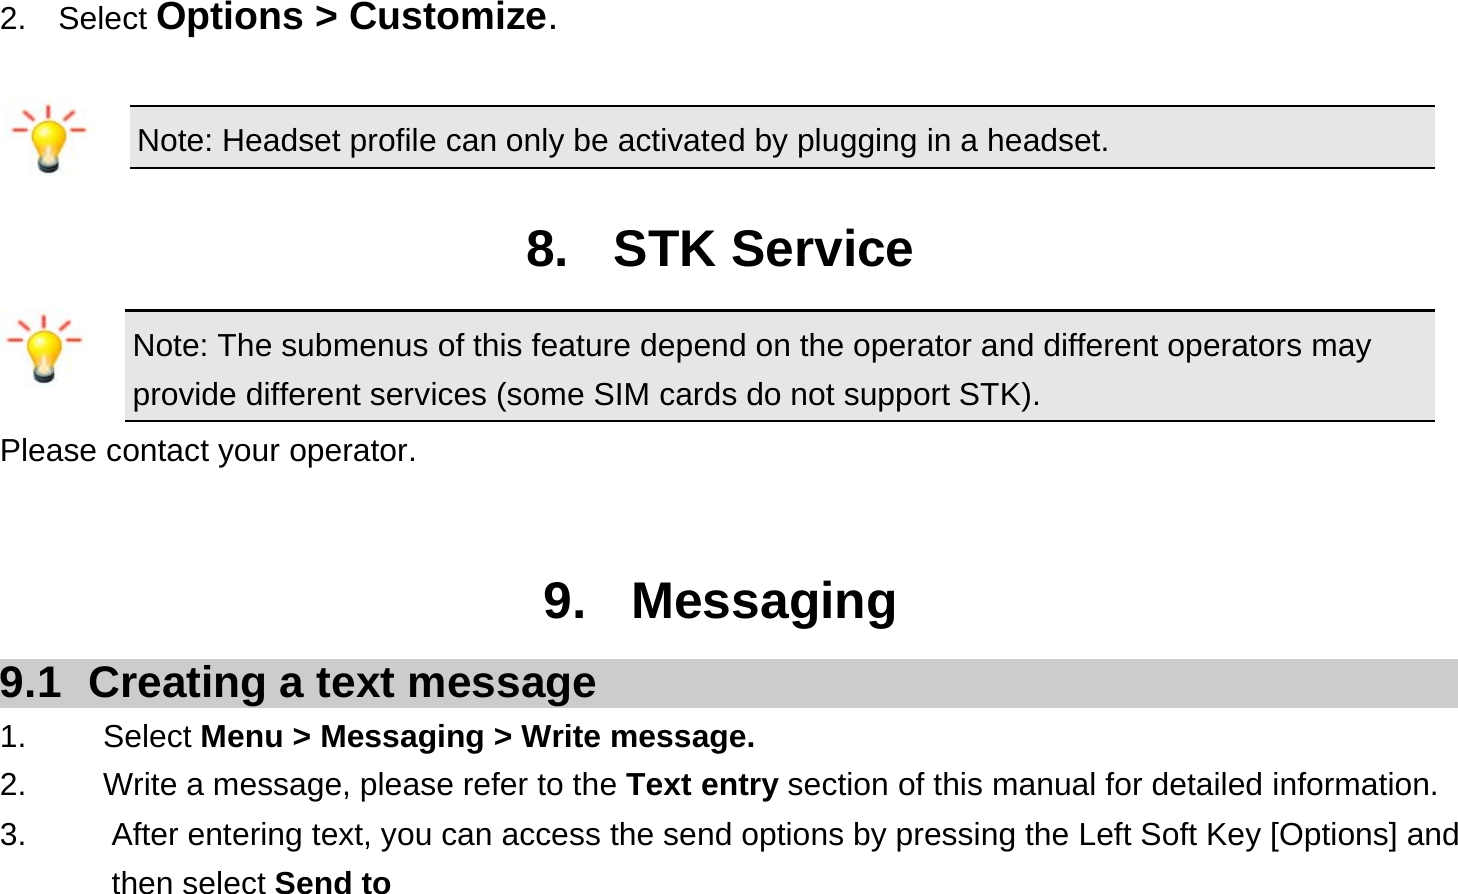 2.  Select Options &gt; Customize.  Note: Headset profile can only be activated by plugging in a headset.  8. STK Service Note: The submenus of this feature depend on the operator and different operators may provide different services (some SIM cards do not support STK). Please contact your operator.   9. Messaging 9.1  Creating a text message 1.   Select Menu &gt; Messaging &gt; Write message. 2.    Write a message, please refer to the Text entry section of this manual for detailed information. 3.  After entering text, you can access the send options by pressing the Left Soft Key [Options] and then select Send to  